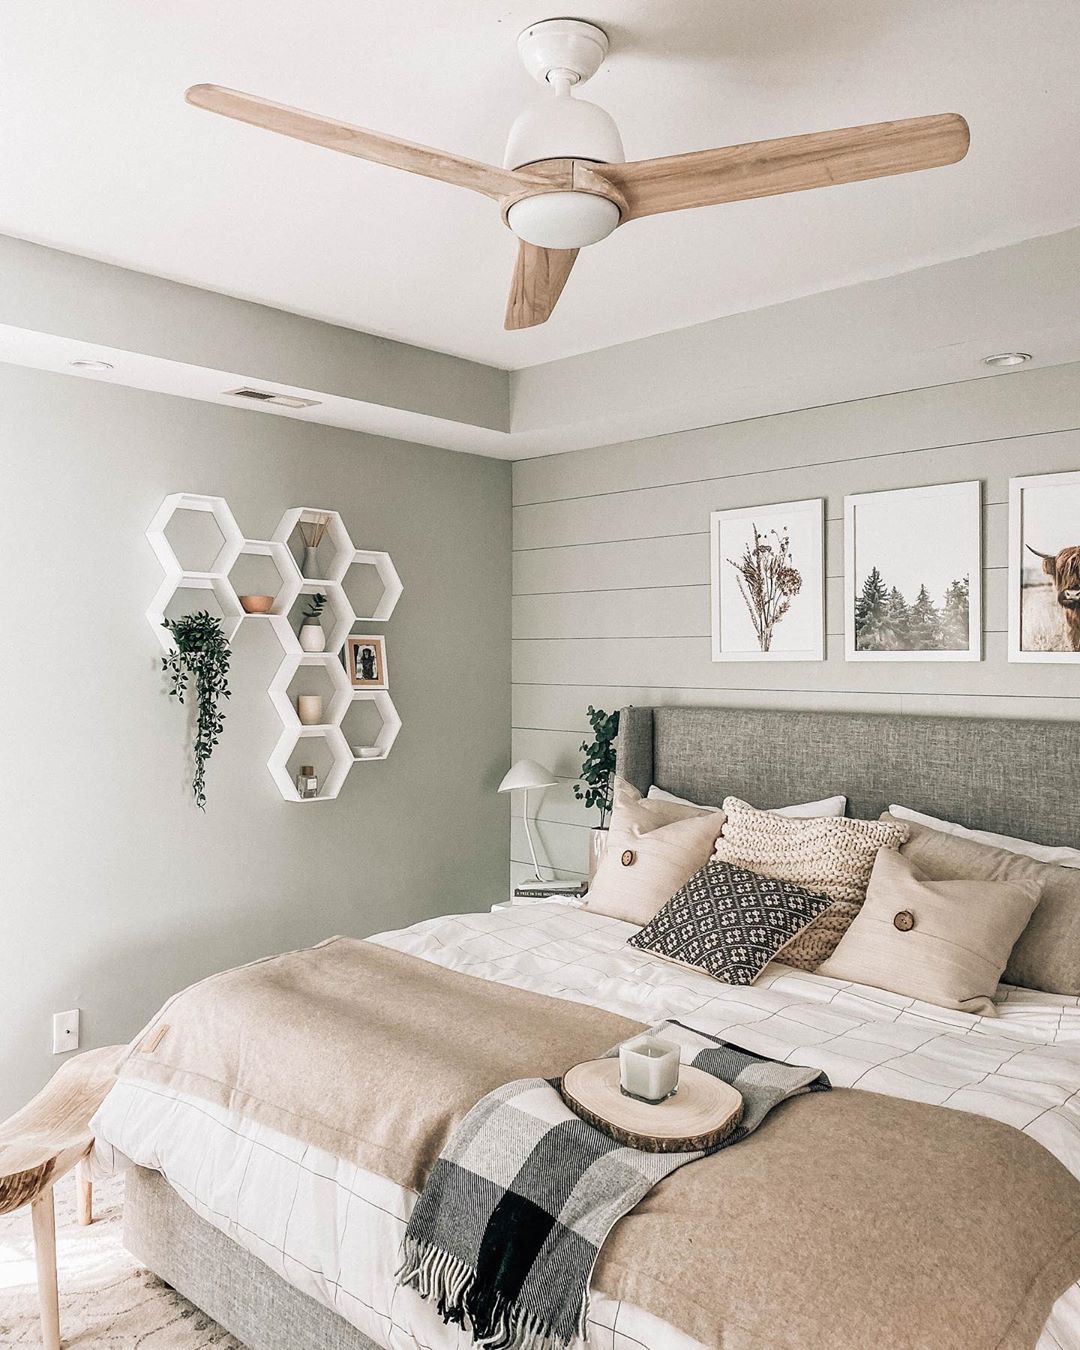 https://www.extraspace.com/blog/wp-content/uploads/2018/05/ceiling-fan-home-features-buyers-want.jpg